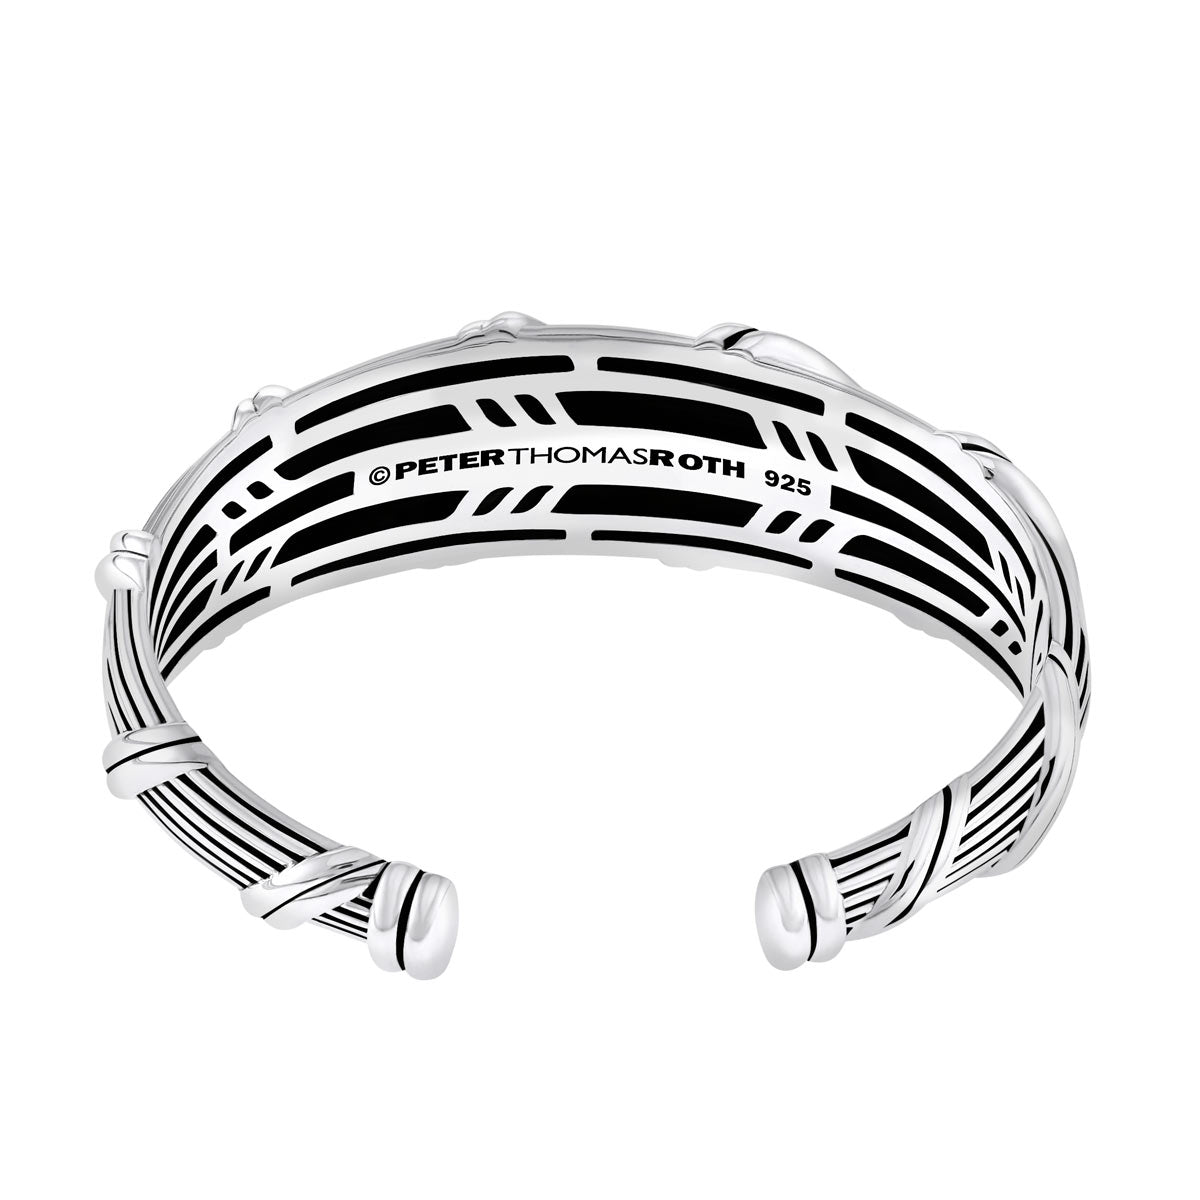 Peter Thomas Roth Ribbon and Reed Signature Classic Oval Cuff in Sterling Silver with Hinge Large